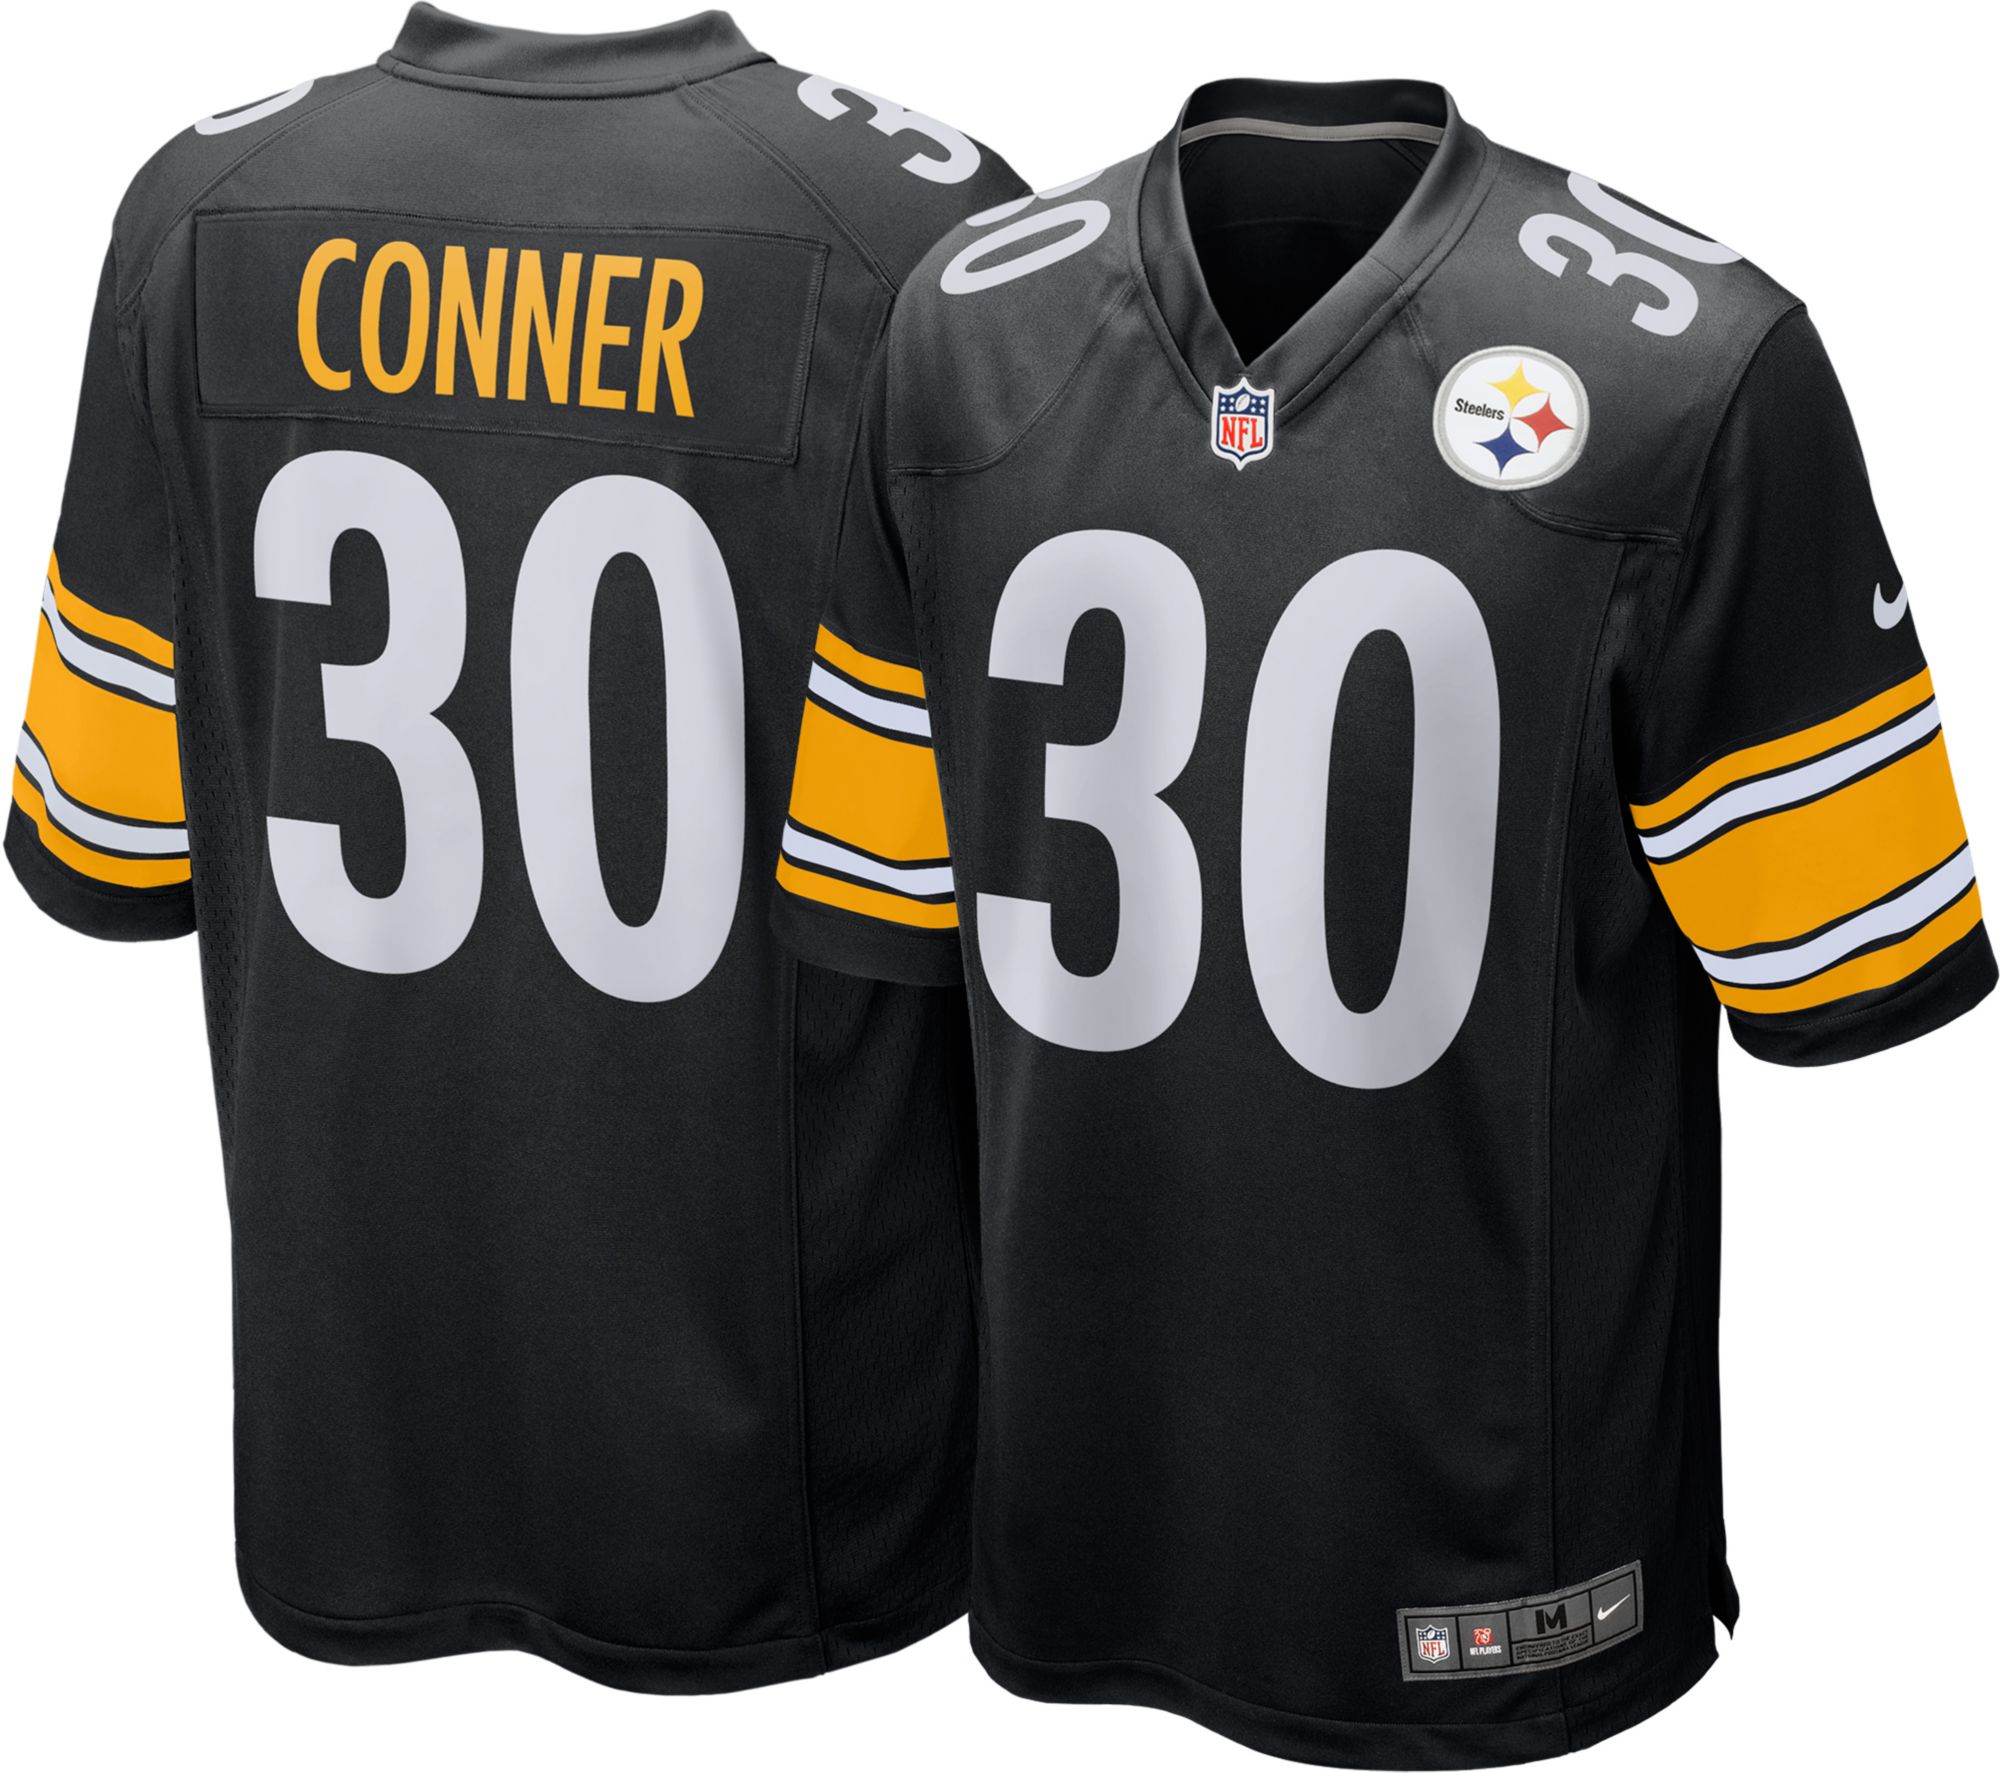 Pittsburgh Steelers James Conner 